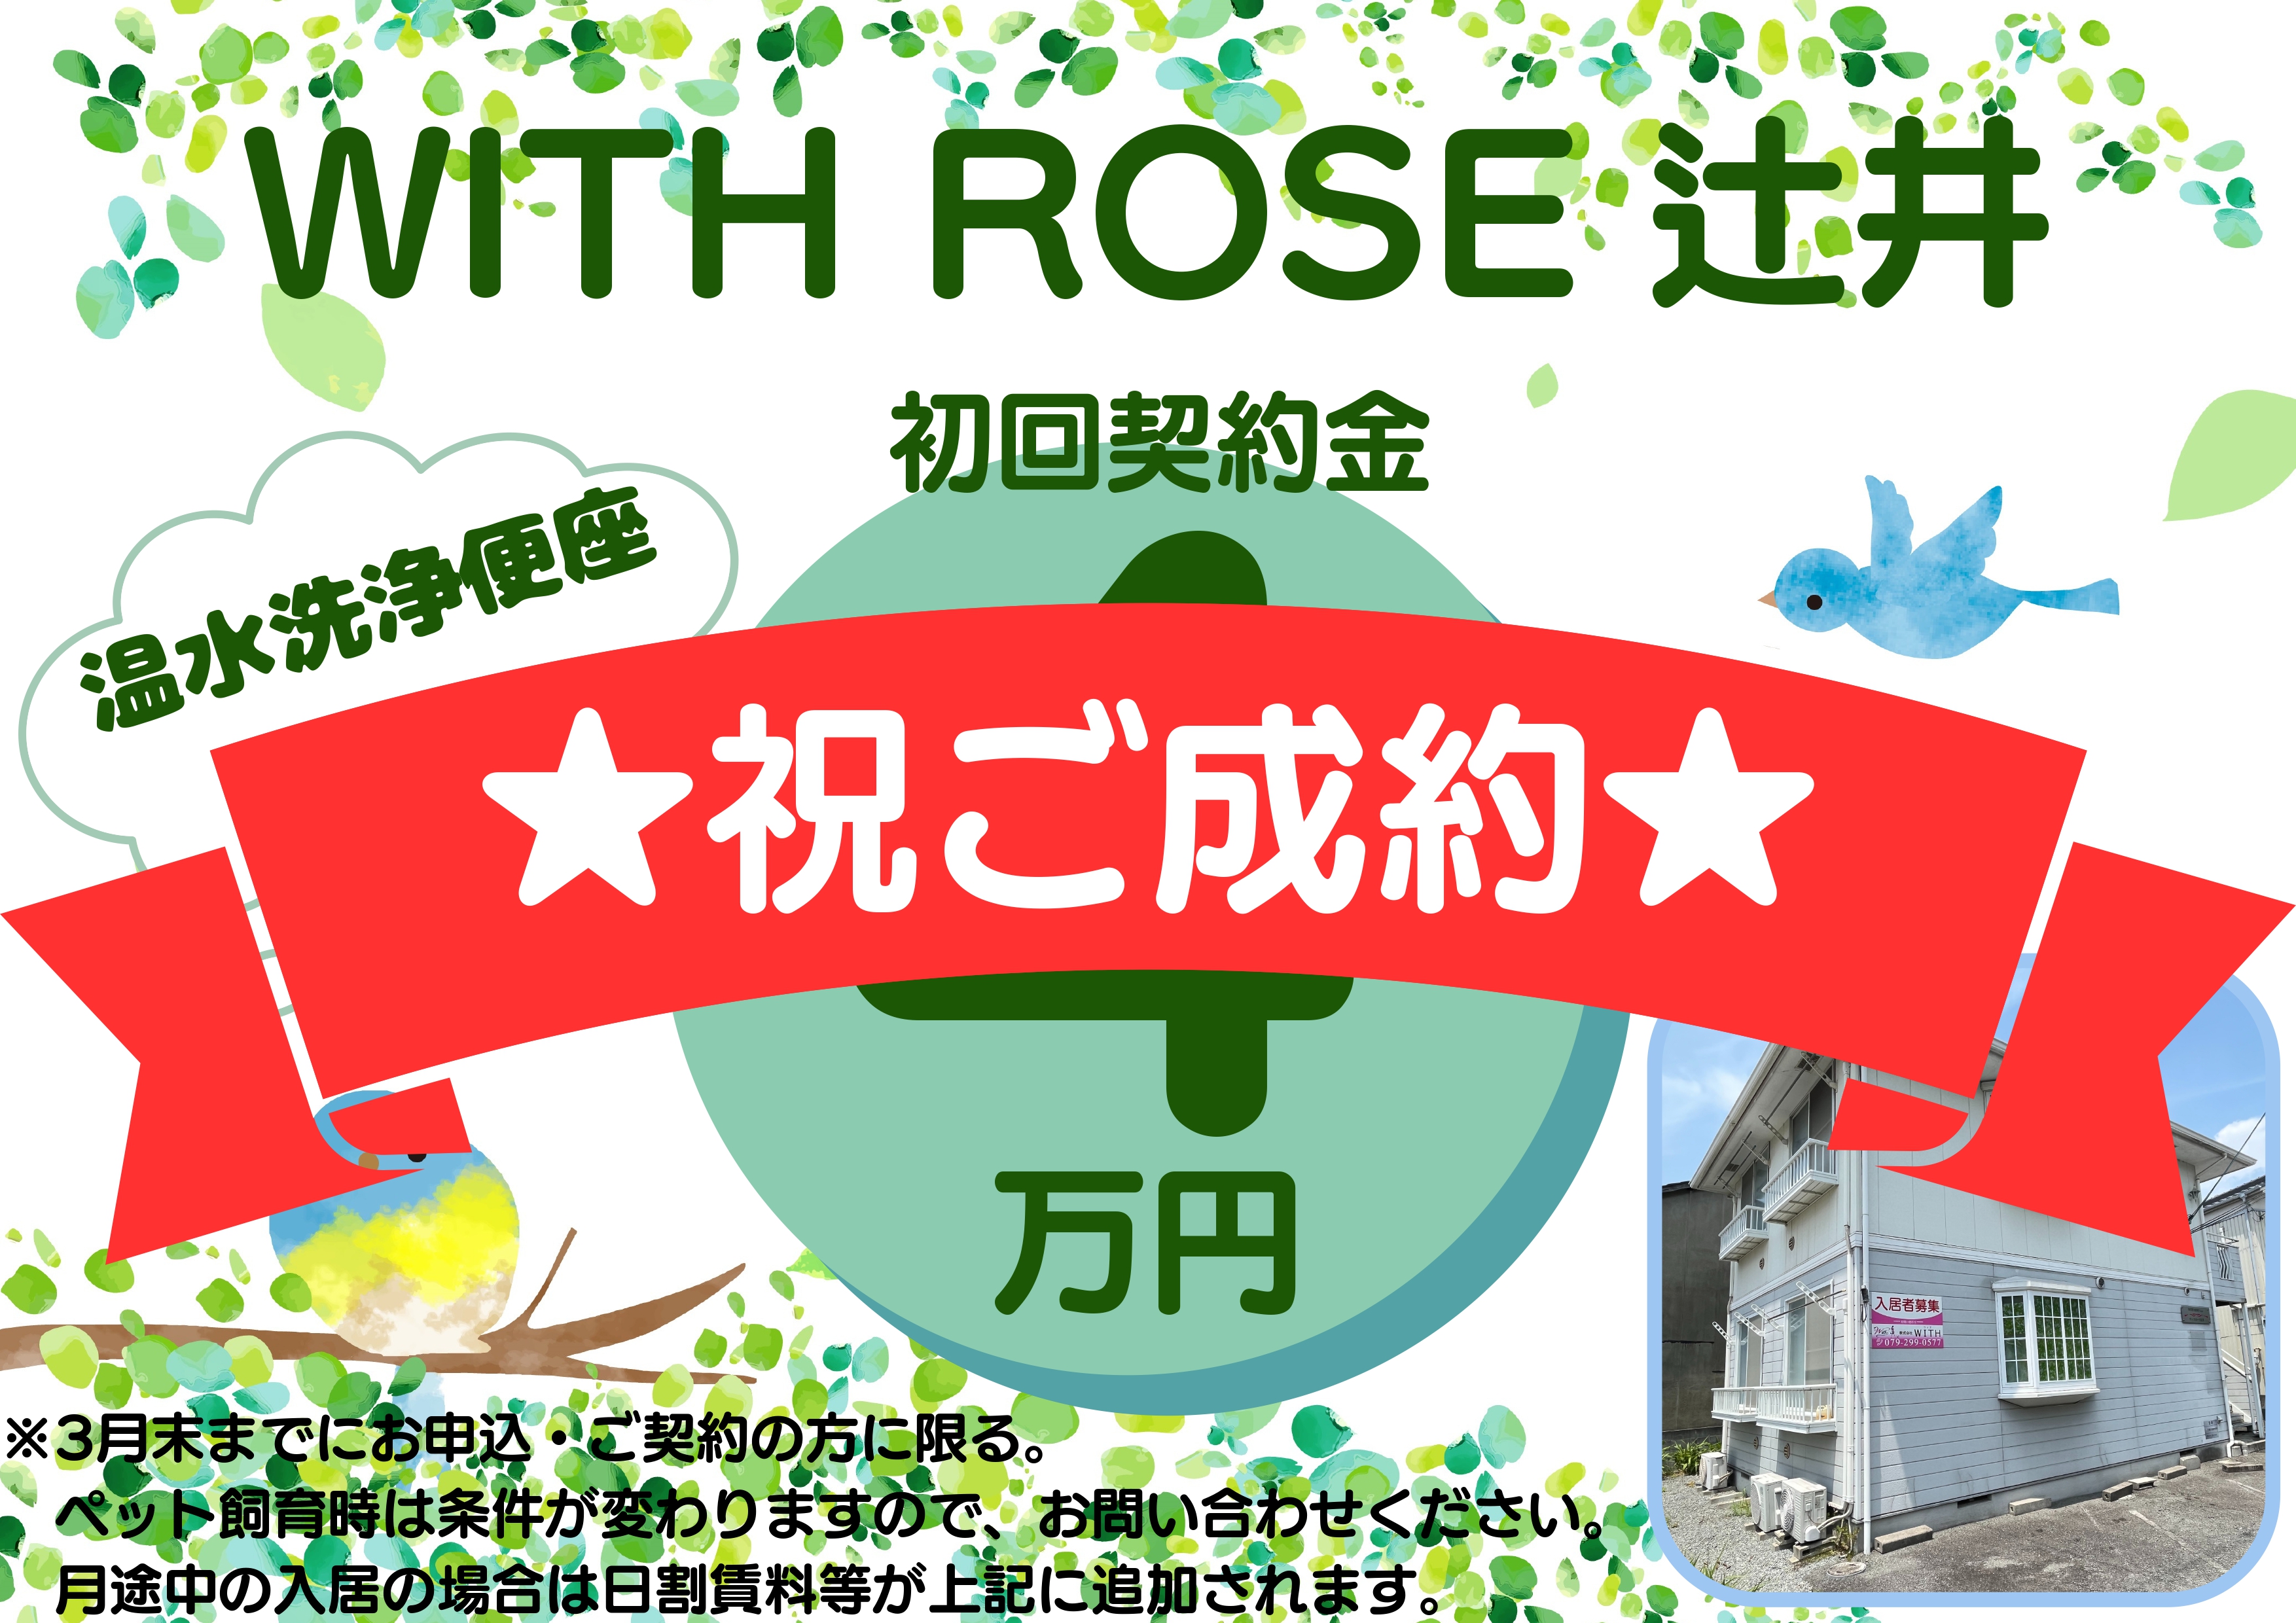 WITH ROSE 辻井 (1)_page-0001